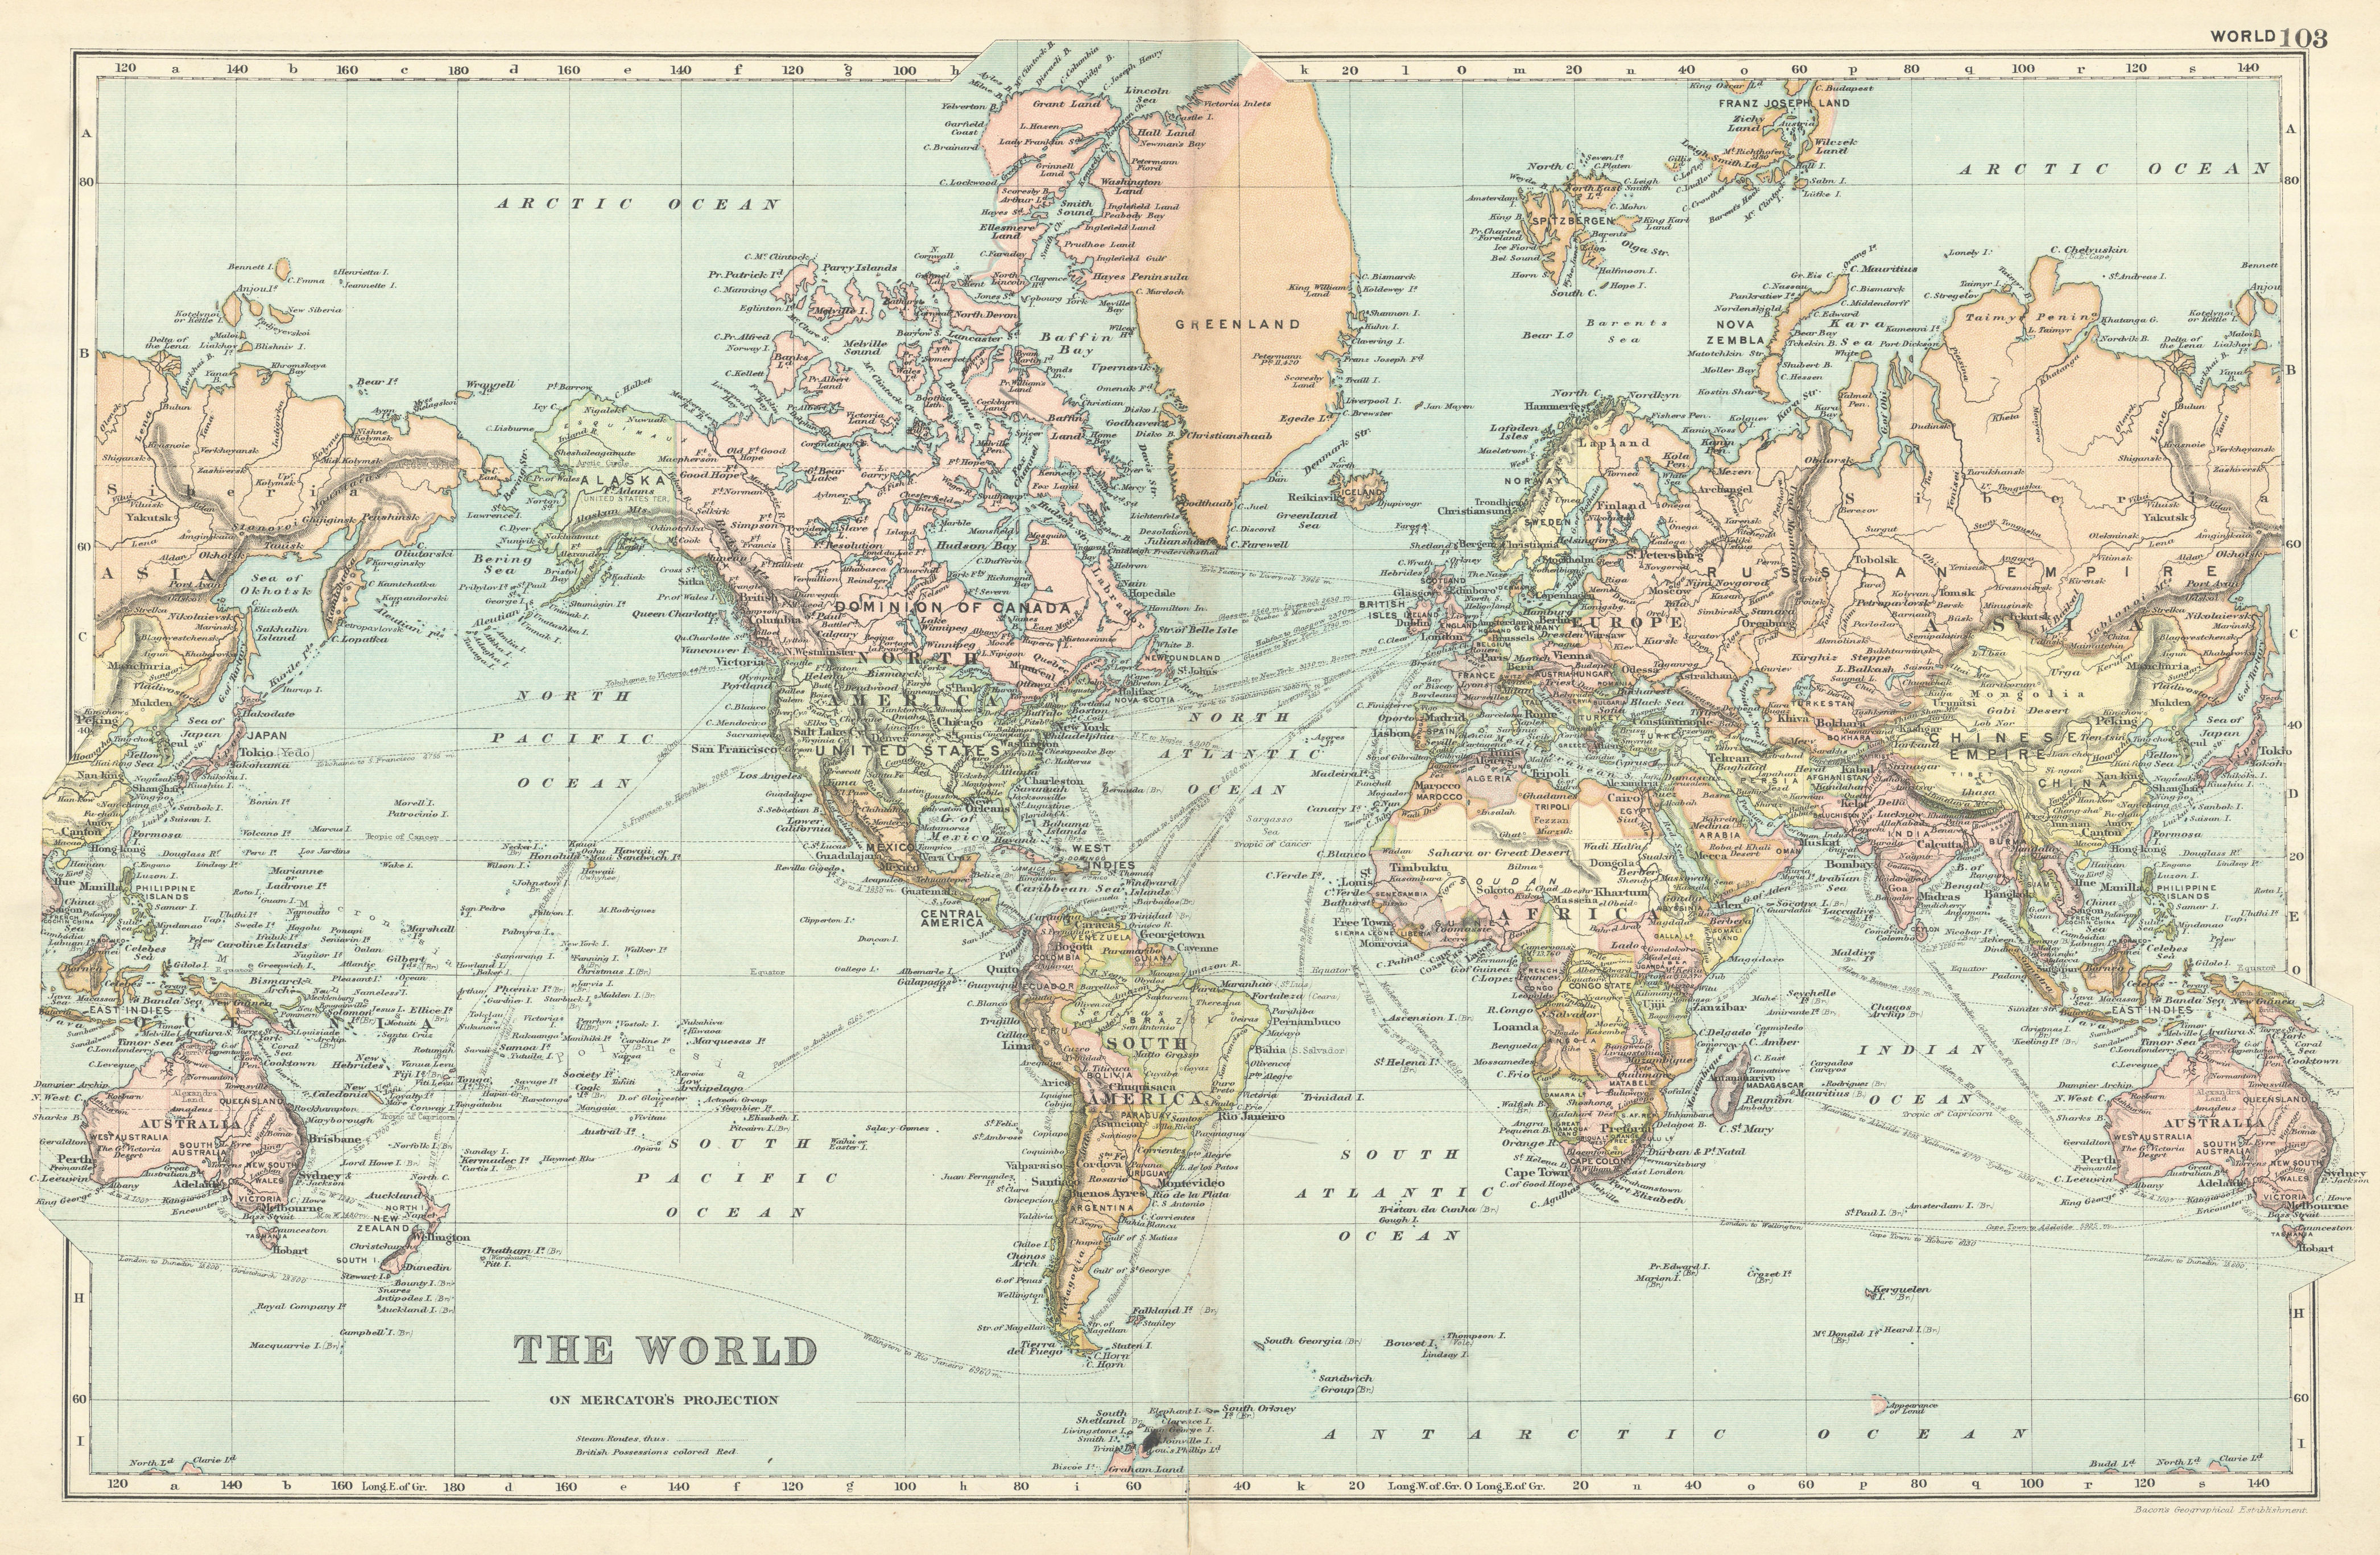 Associate Product WORLD ON MERCATOR'S PROJECTION showing the BRITISH EMPIRE by GW BACON 1898 map